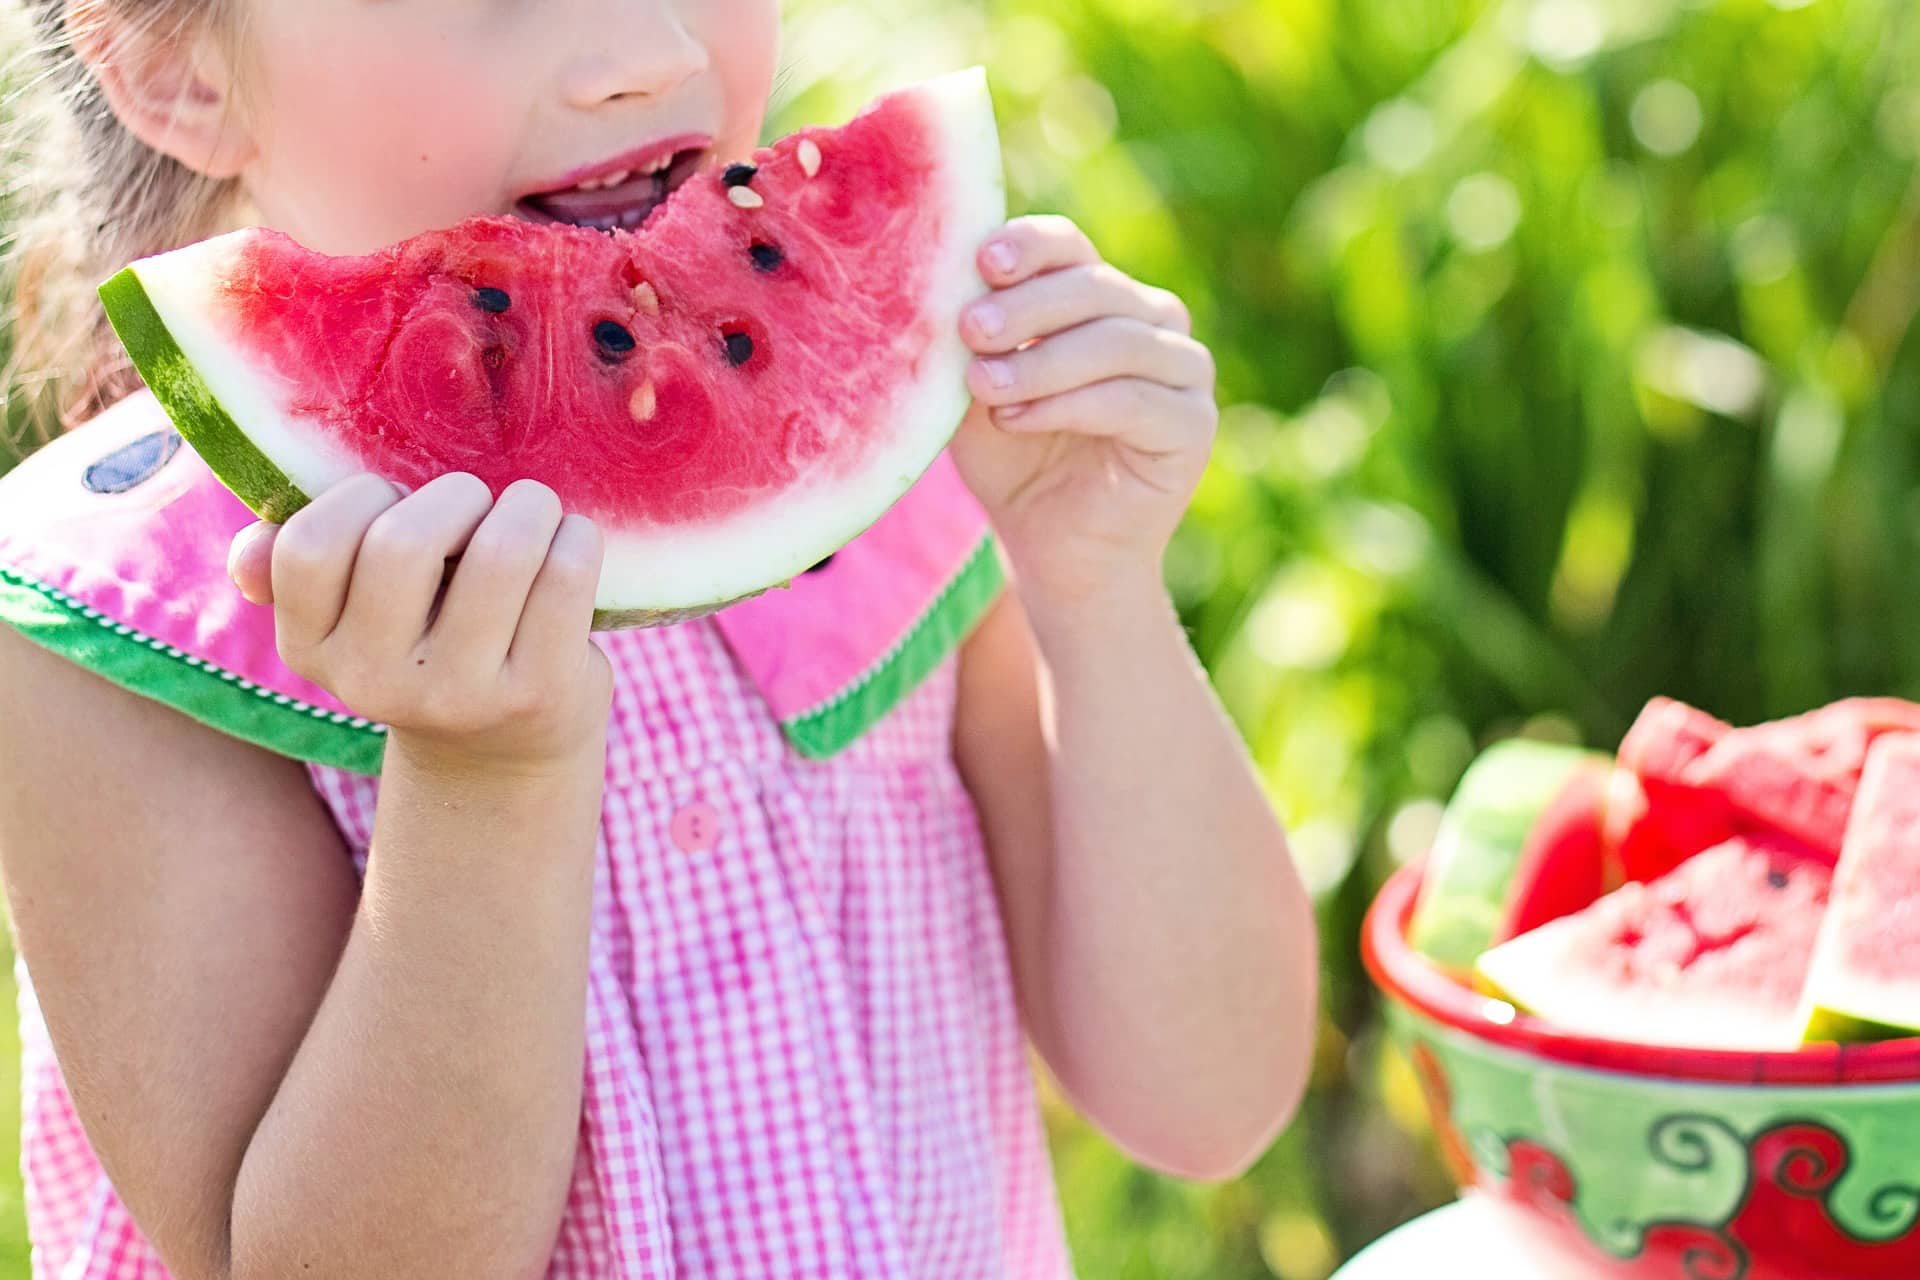 girl eating a slice of watermelon.